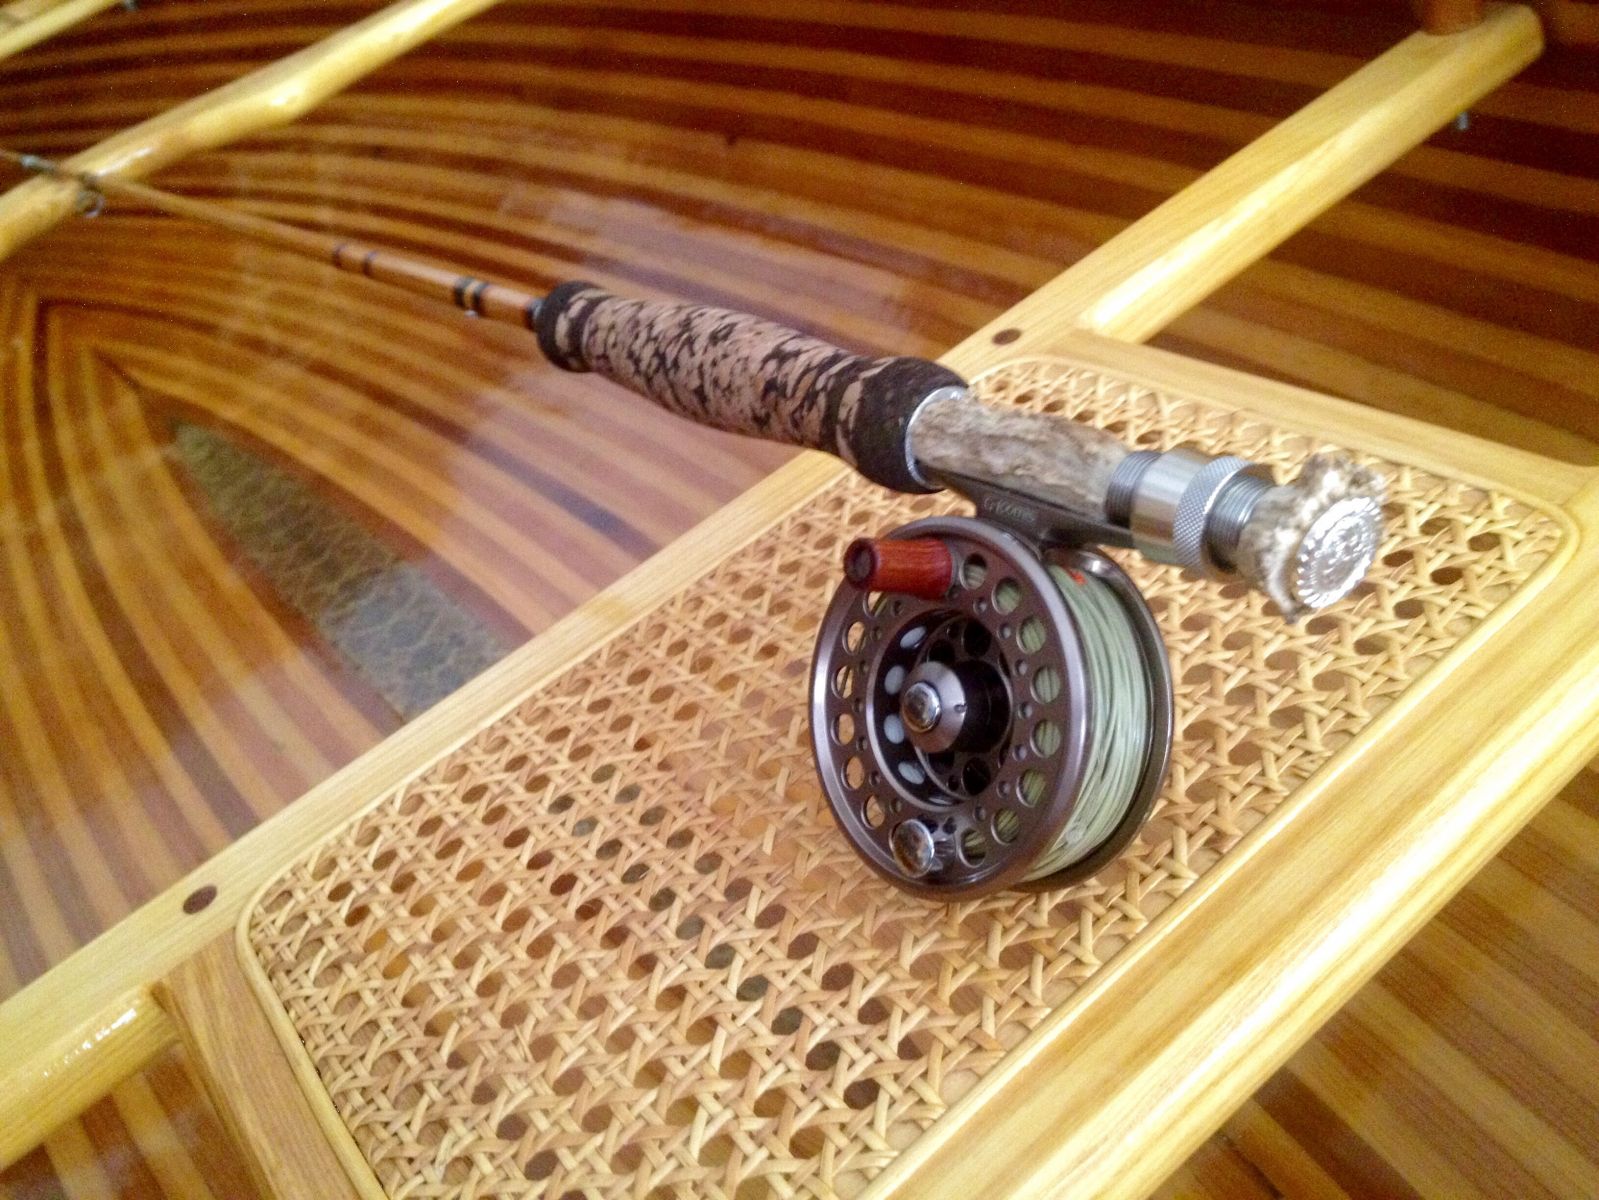 Bamboo fly rod with deer antler reel seat. - 2016 Mud Hole Calendar Contest  